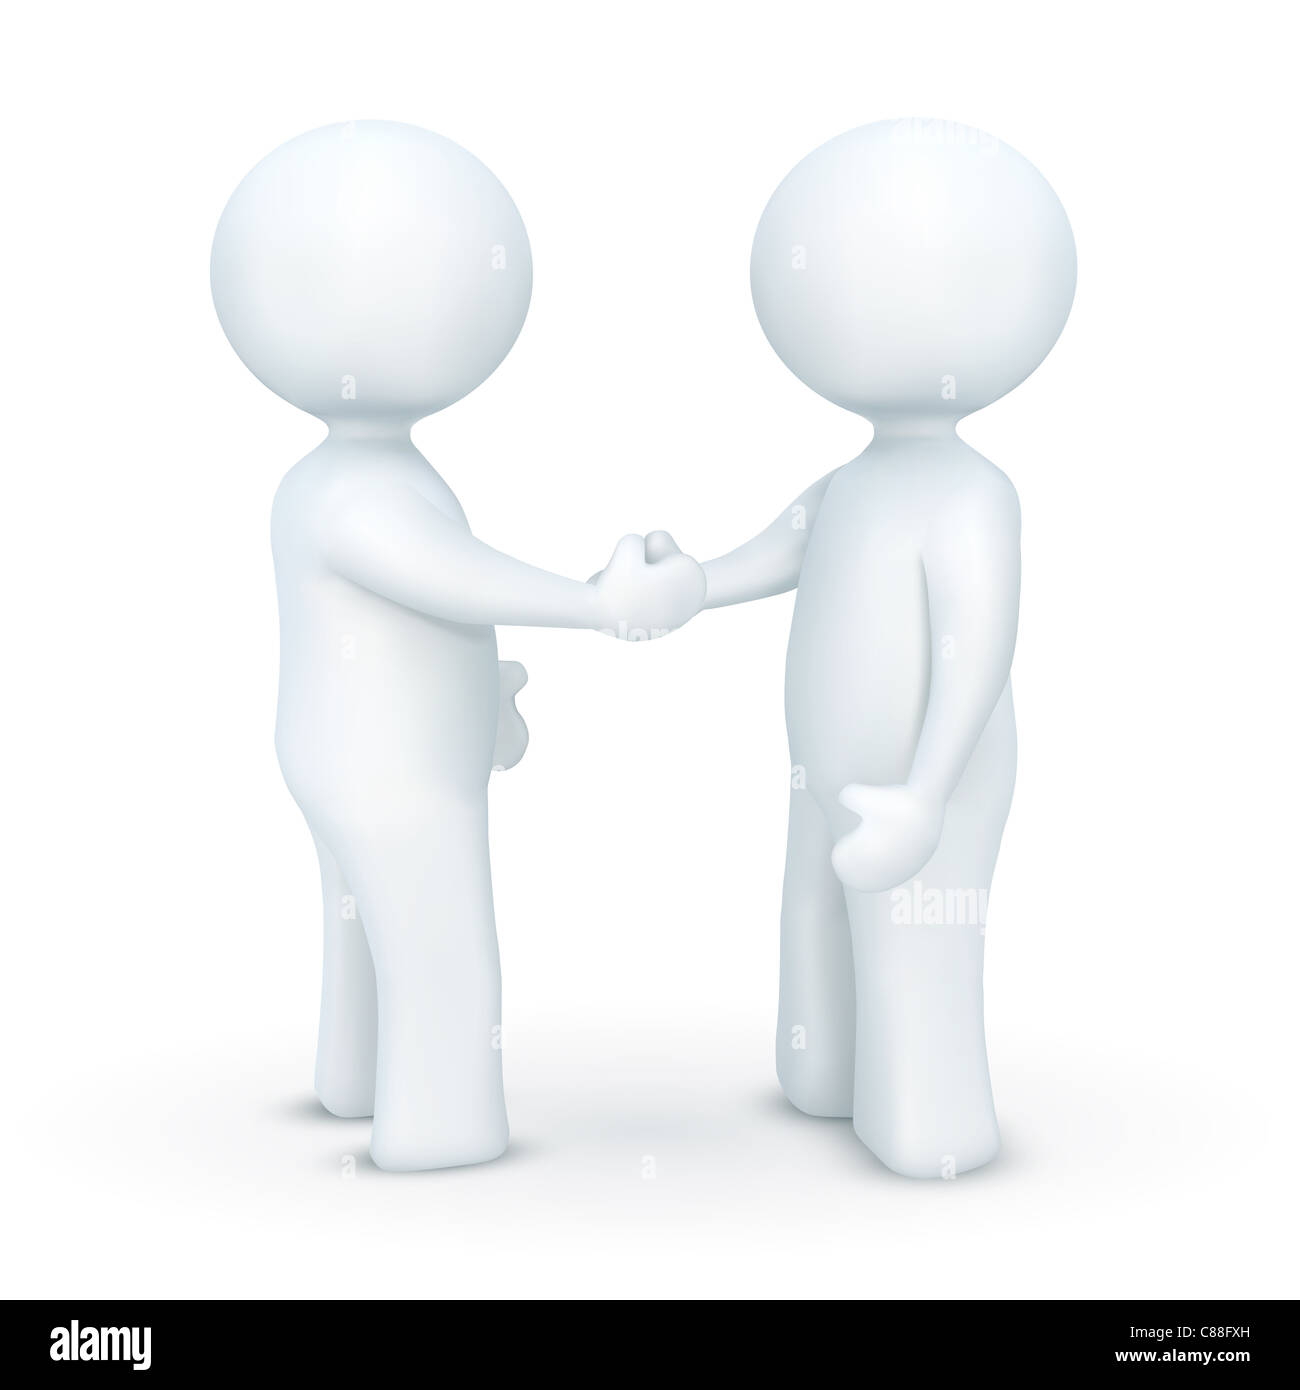 illustration of 3d character hand shaking on an isolated white background Stock Photo